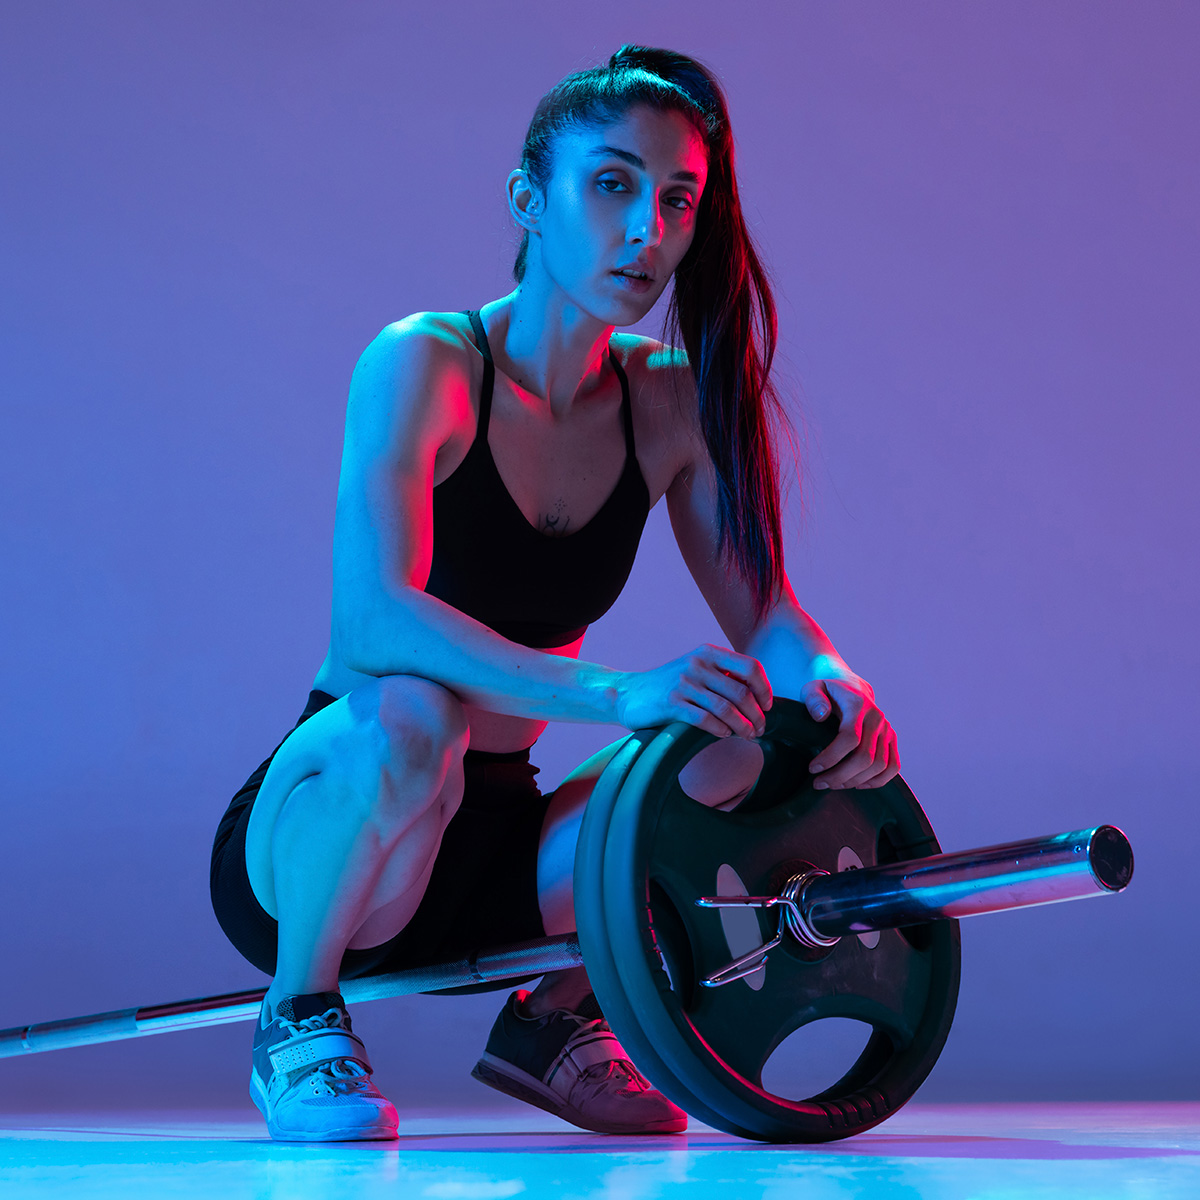 portrait-of-muscled-woman-training-with-a-barbell-isolated-on-purple-background-in-neon-light